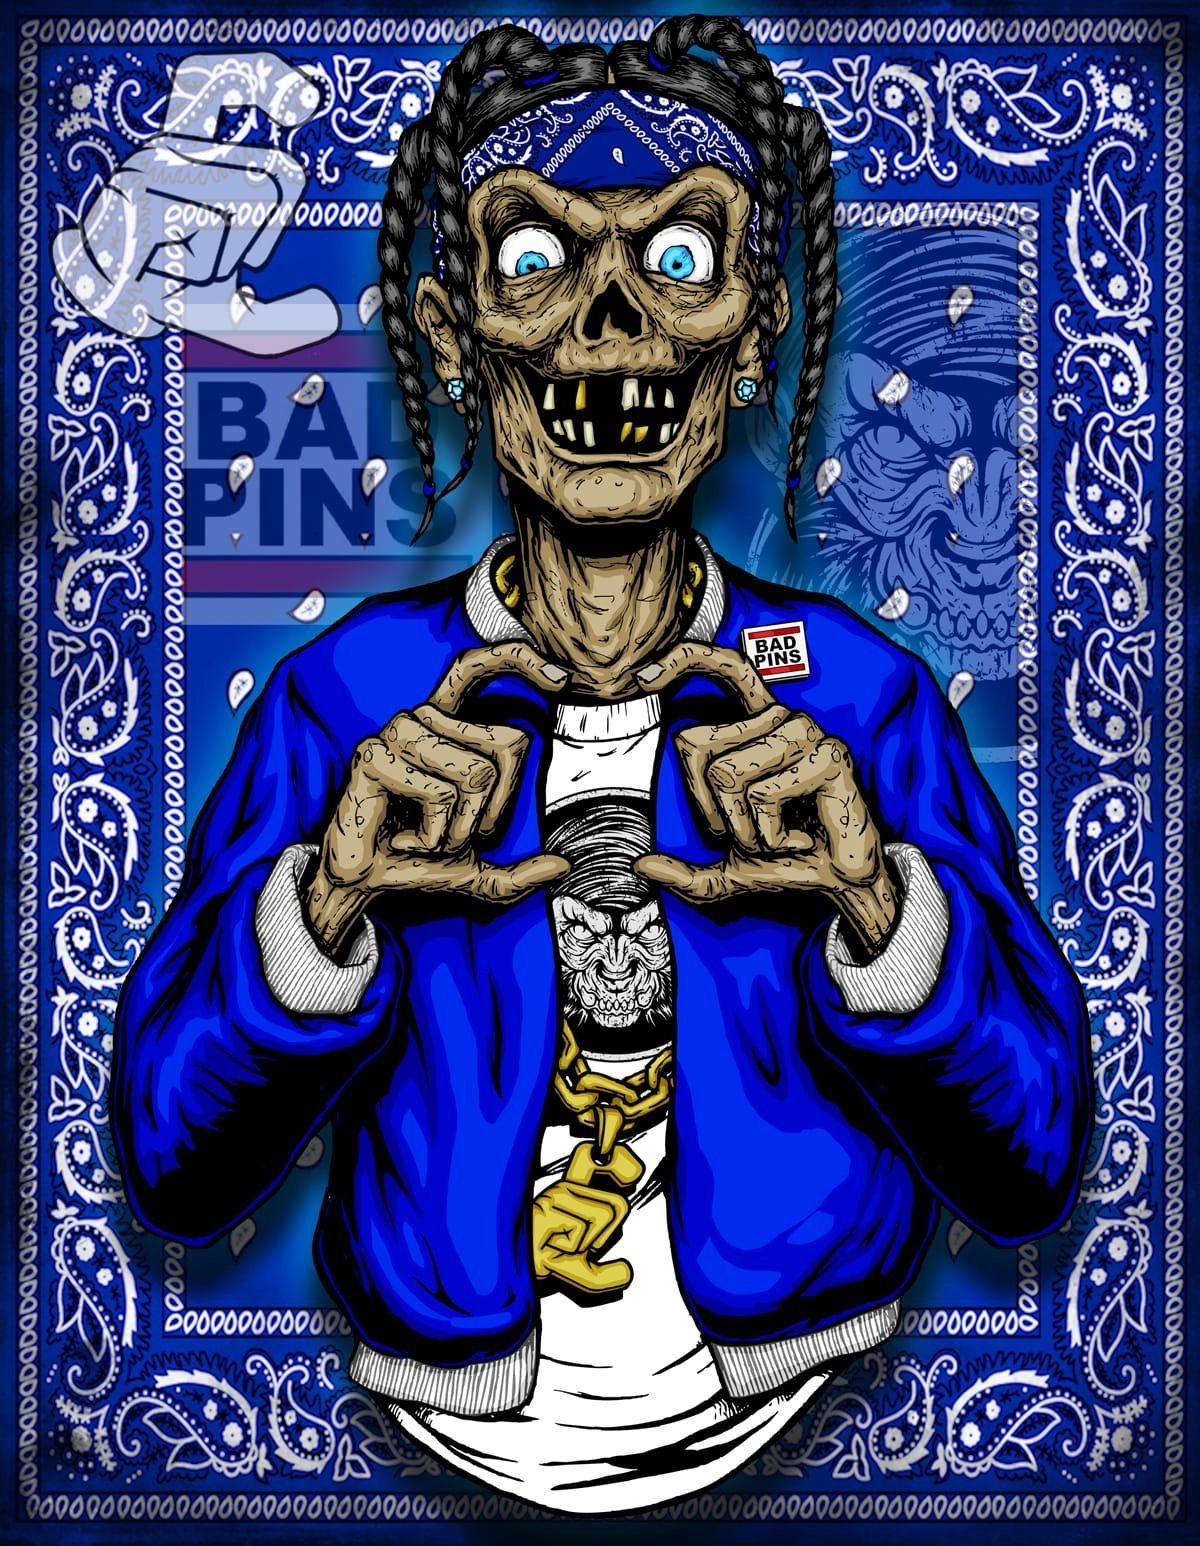 Pin on Crip Wallpapers.